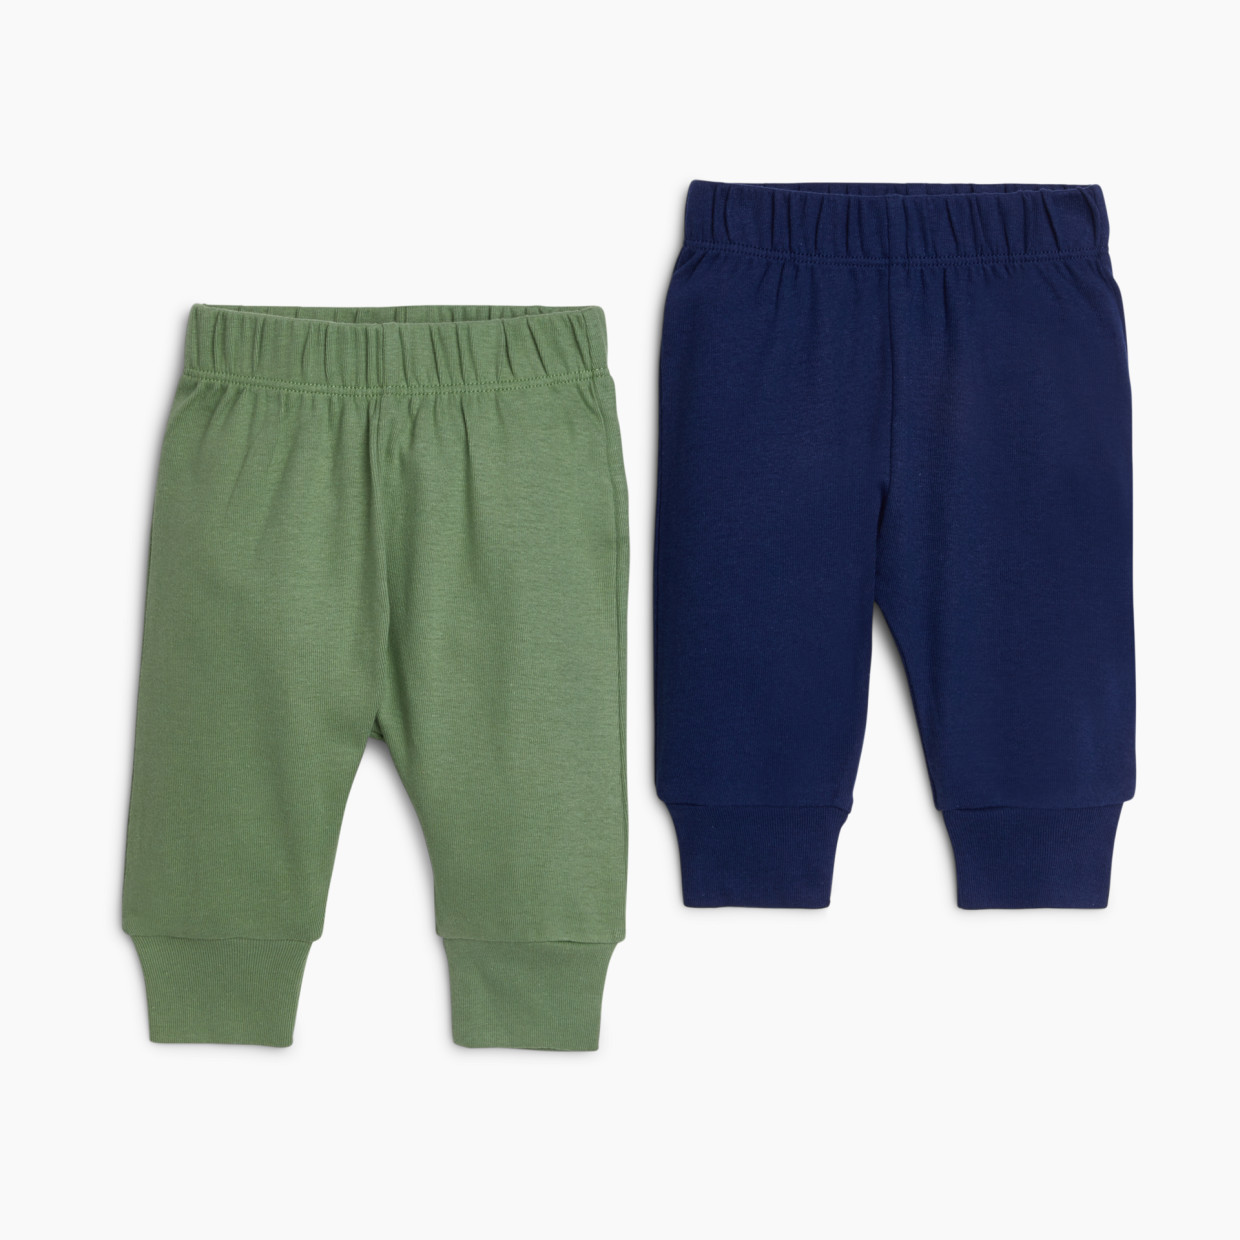 Small Story Pants (2 Pack) - Navy/Green, 0-3 M.